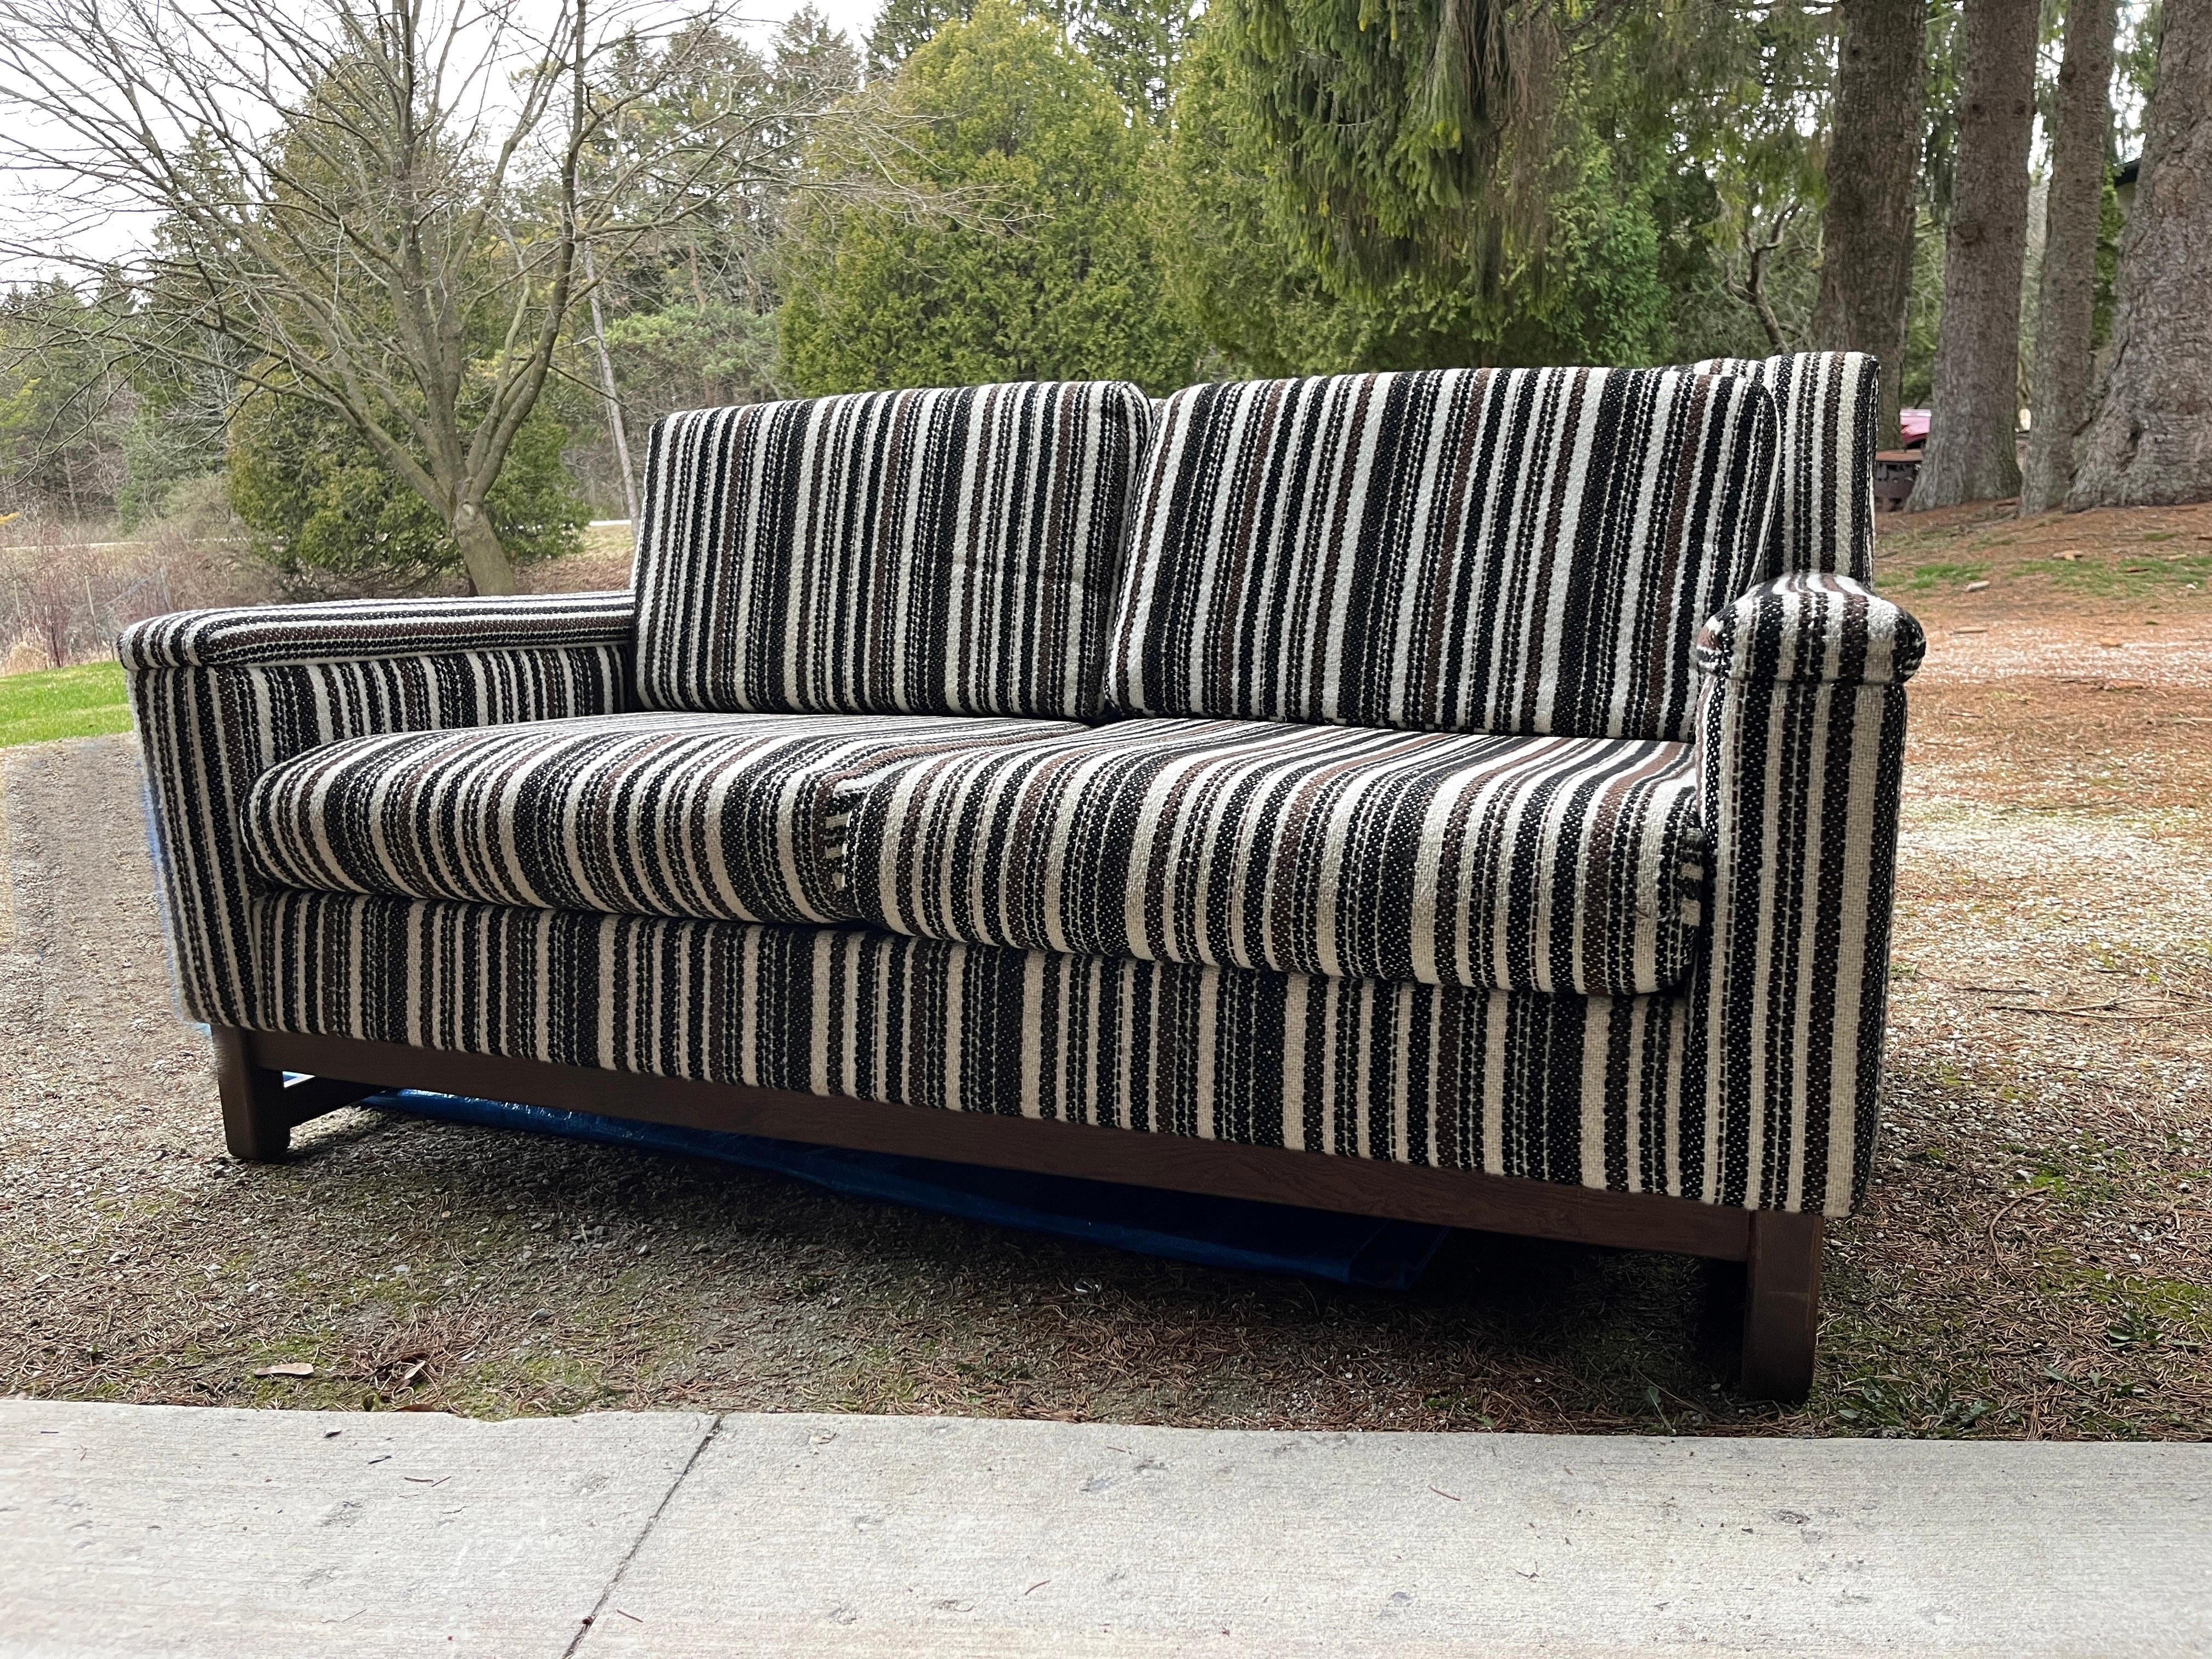 What a find. Mid-Century Modern loveseat made by Selig of Monroe from 1965. This is a two-seat with black, brown and cream striped polyester upholstery and solid wood base. Very solid and well-crafted piece. Original tags in place.

Designer